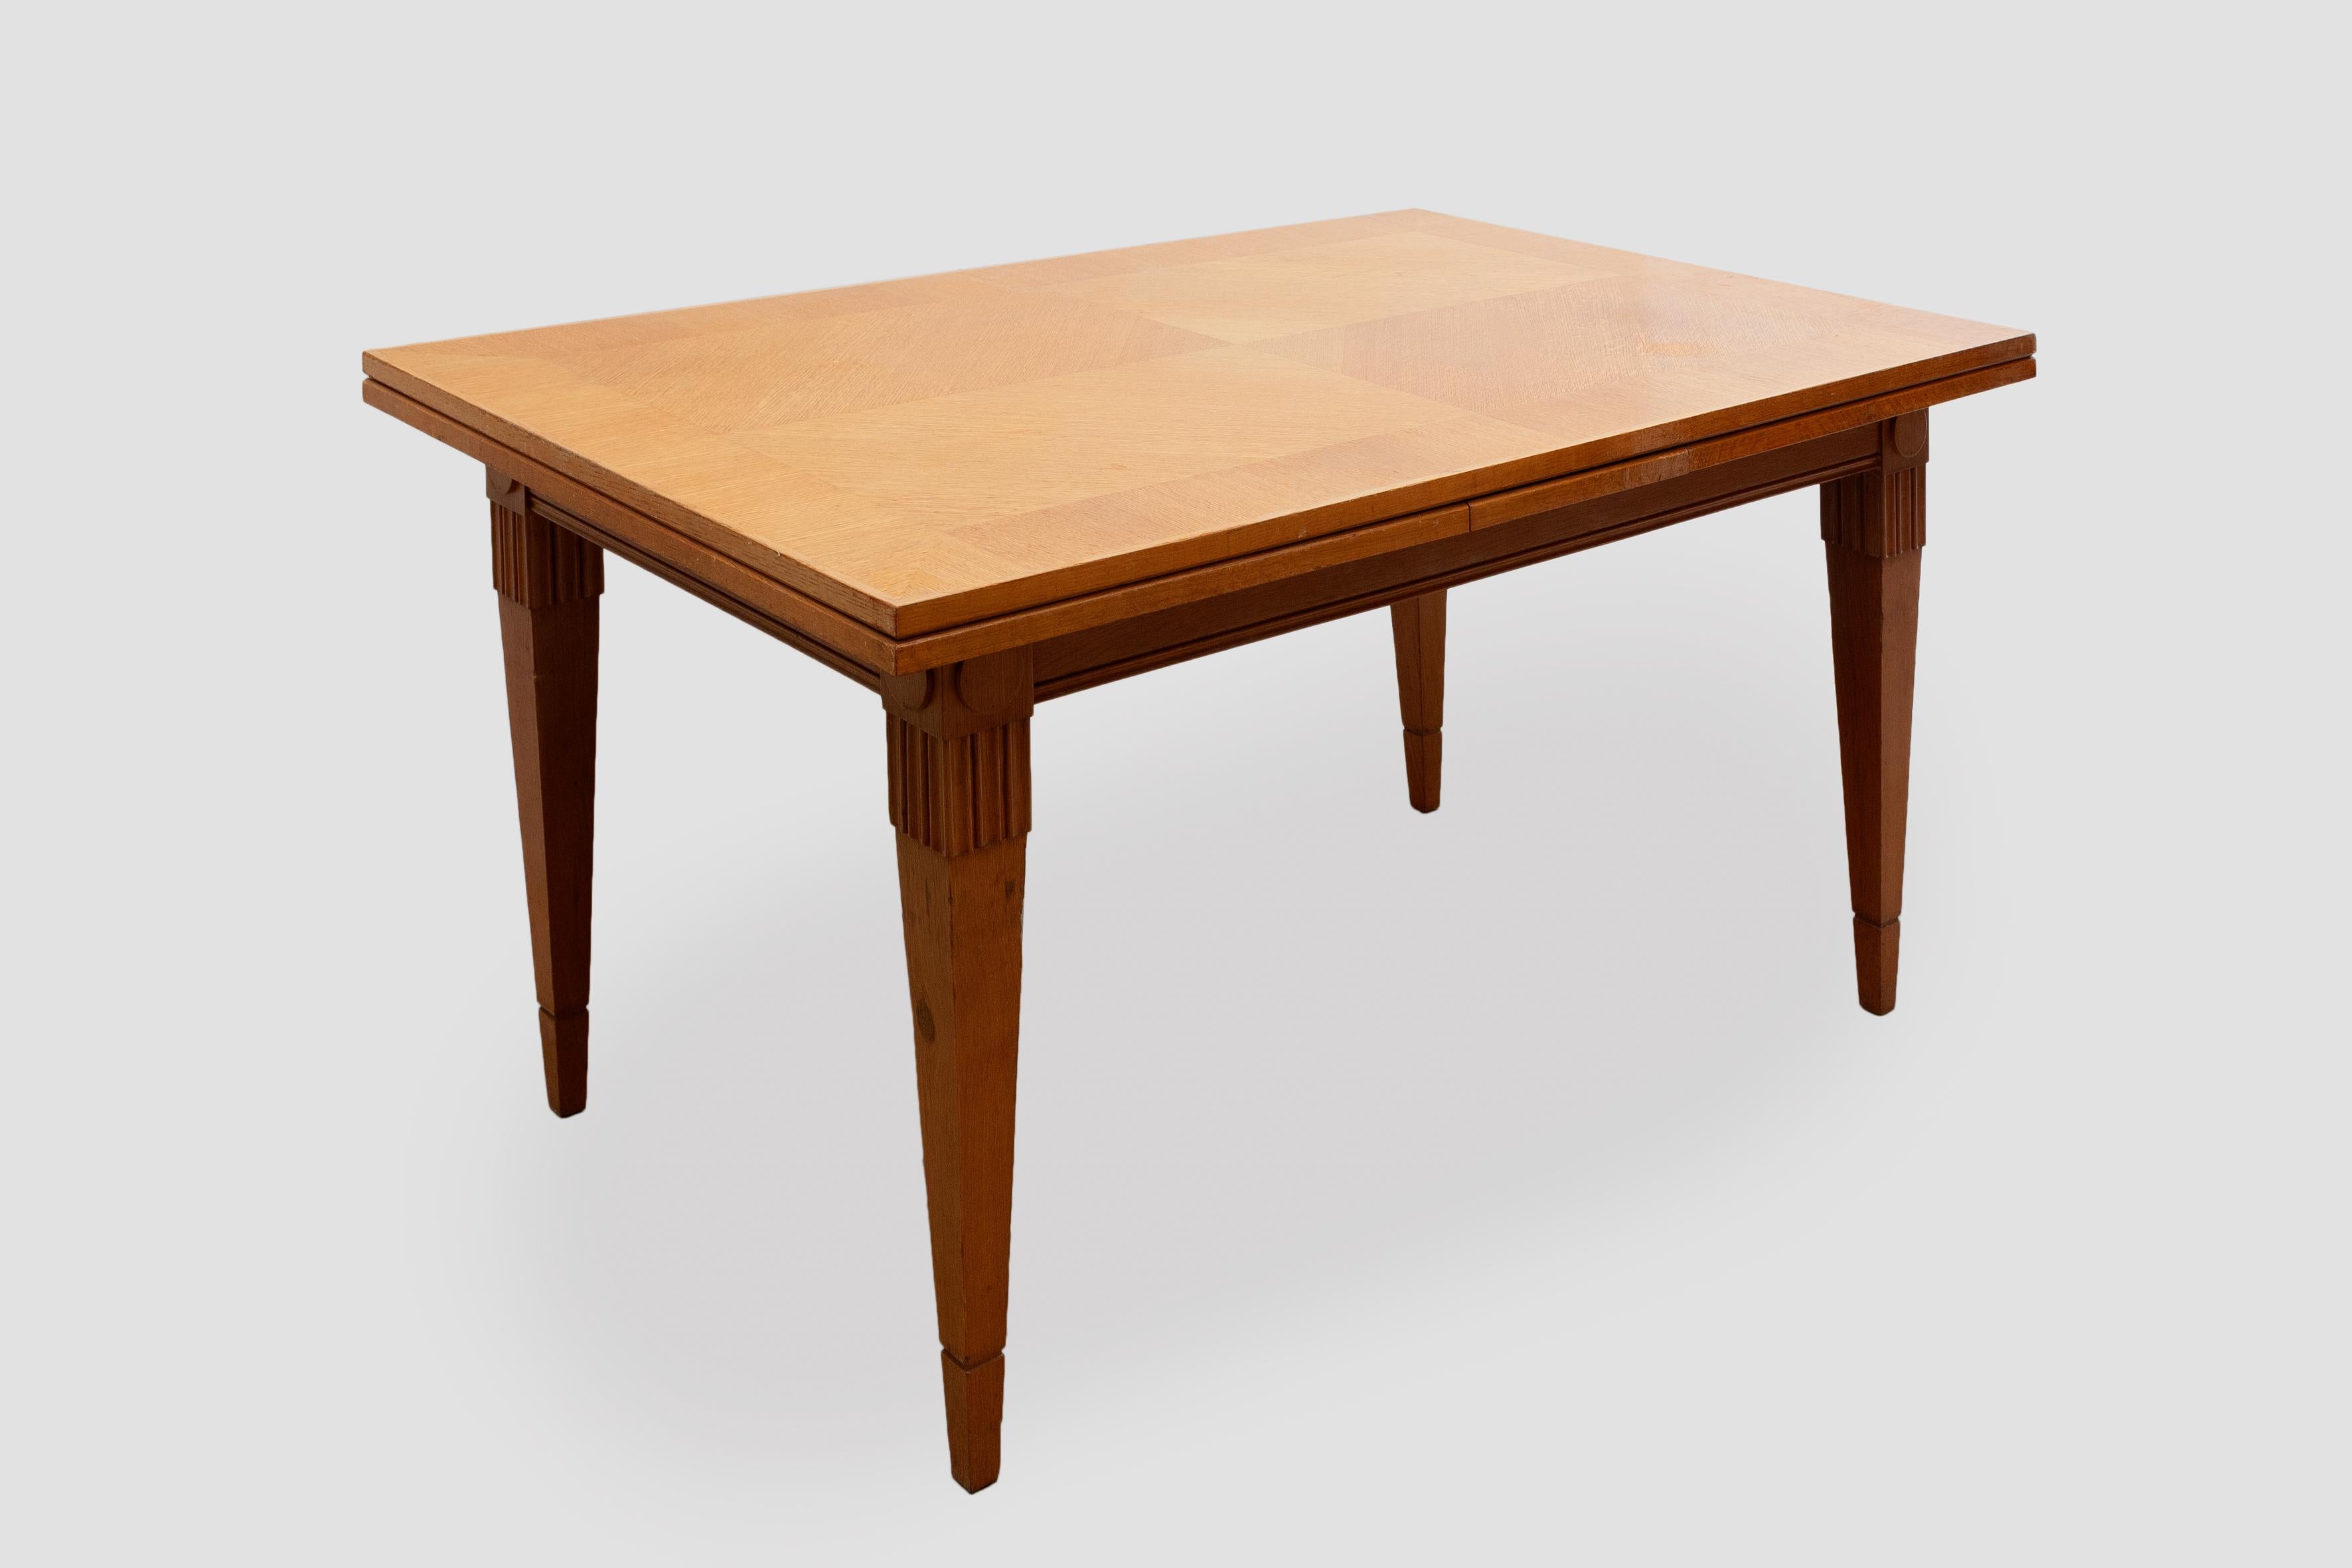 Mid-20th Century De Coene Extension Dining Table 1940s Belgium For Sale